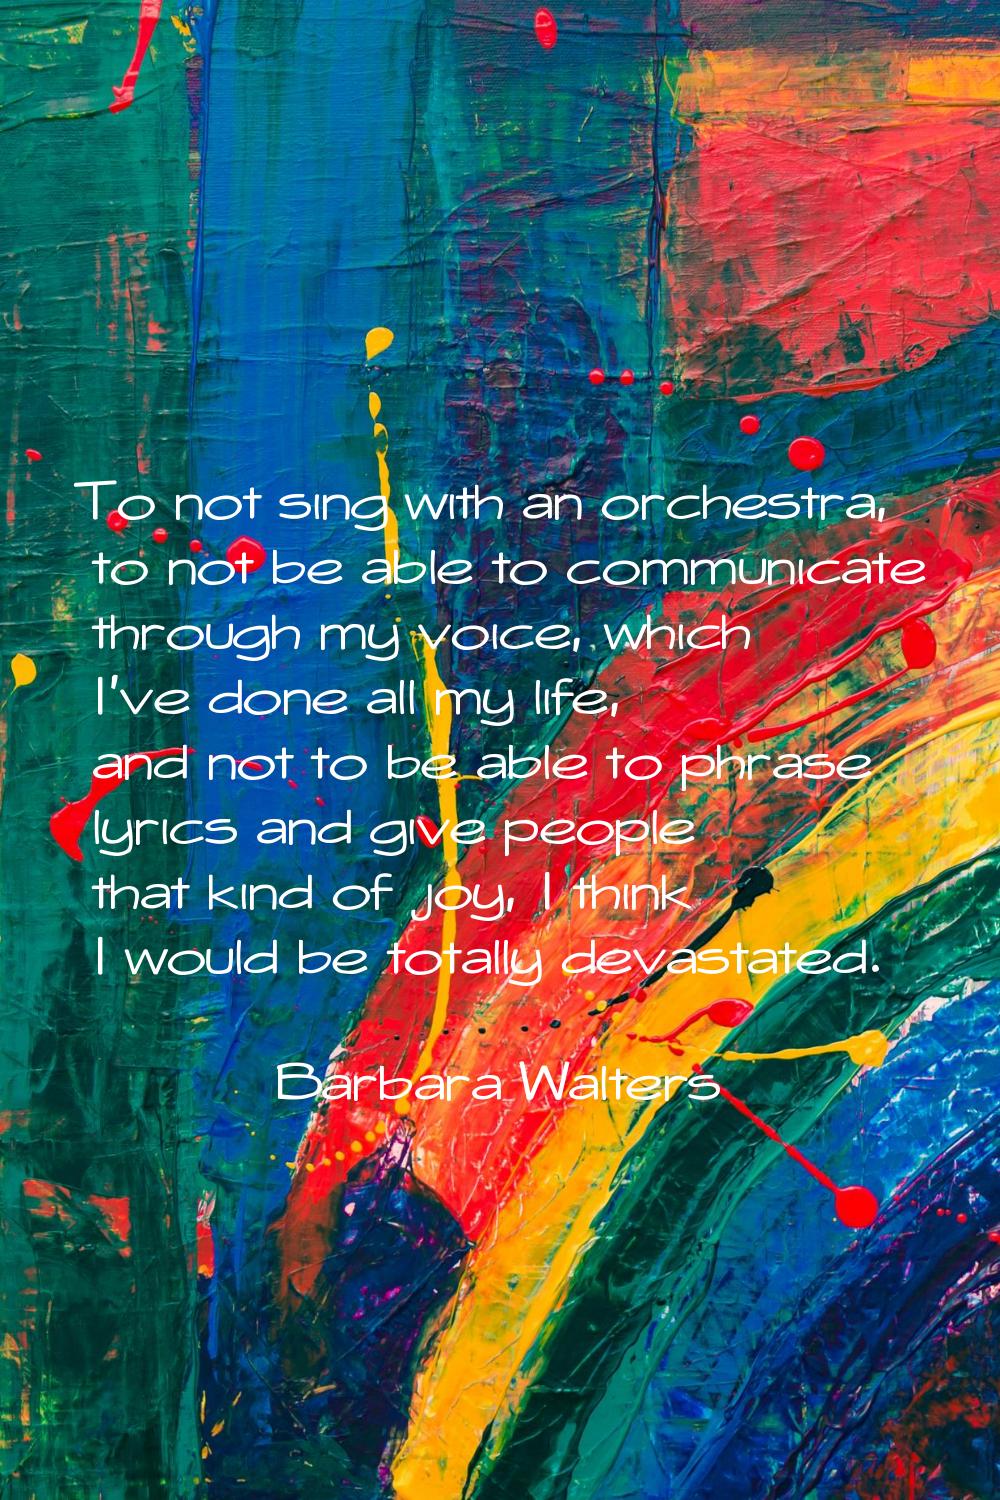 To not sing with an orchestra, to not be able to communicate through my voice, which I've done all 